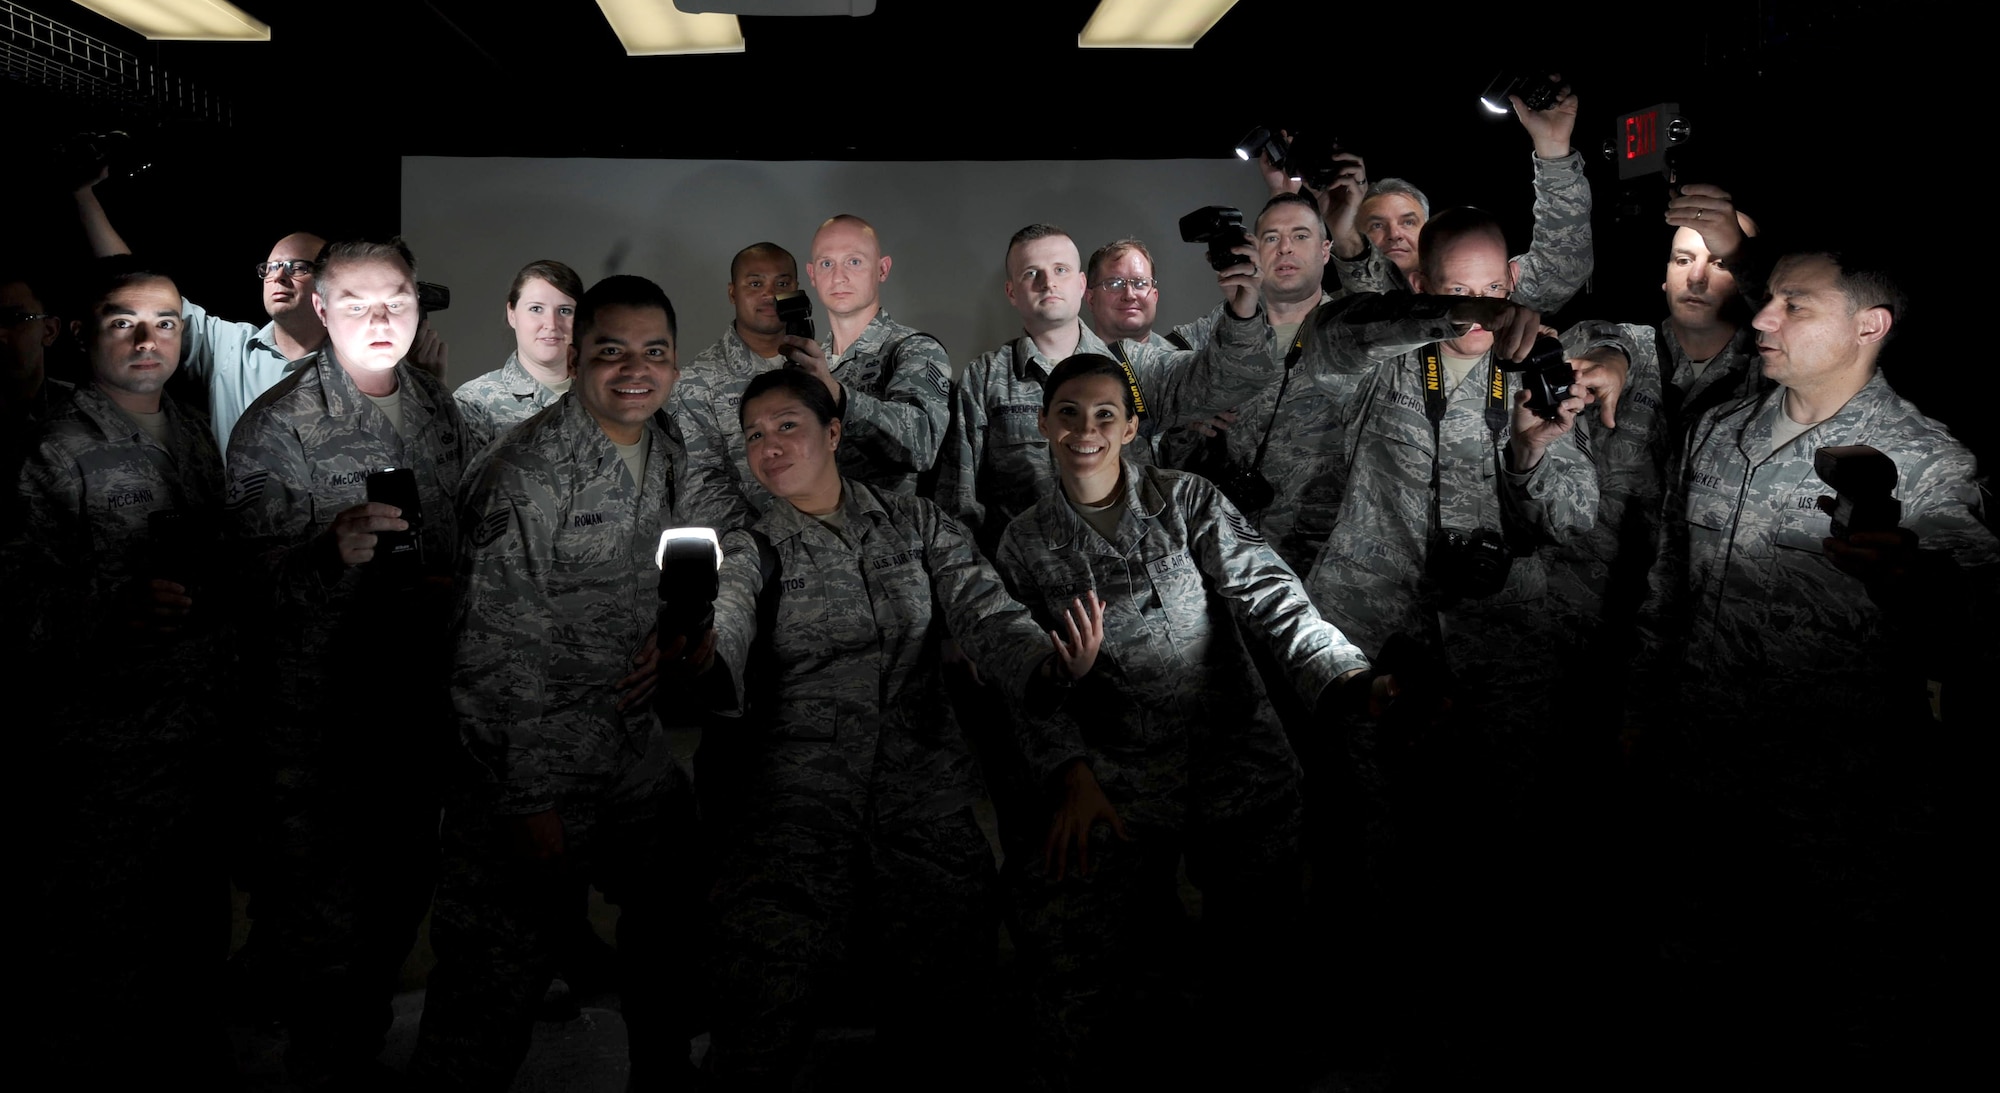 Reservist learn how to use multiple flashes to create unique photos during a training course with the 1st Combat Camera Squadron this week. About 23 Air Force Reserve public affairs specialists from bases across the country showed up at Joint Base Charleston with an eagerness to improve their photo skills under the tutelage of some of the Air Force’s most elite photographers – 1st Combat Camera Airmen. (U.S. Air Force photo by Tech Sgt. Denoris Mickle)